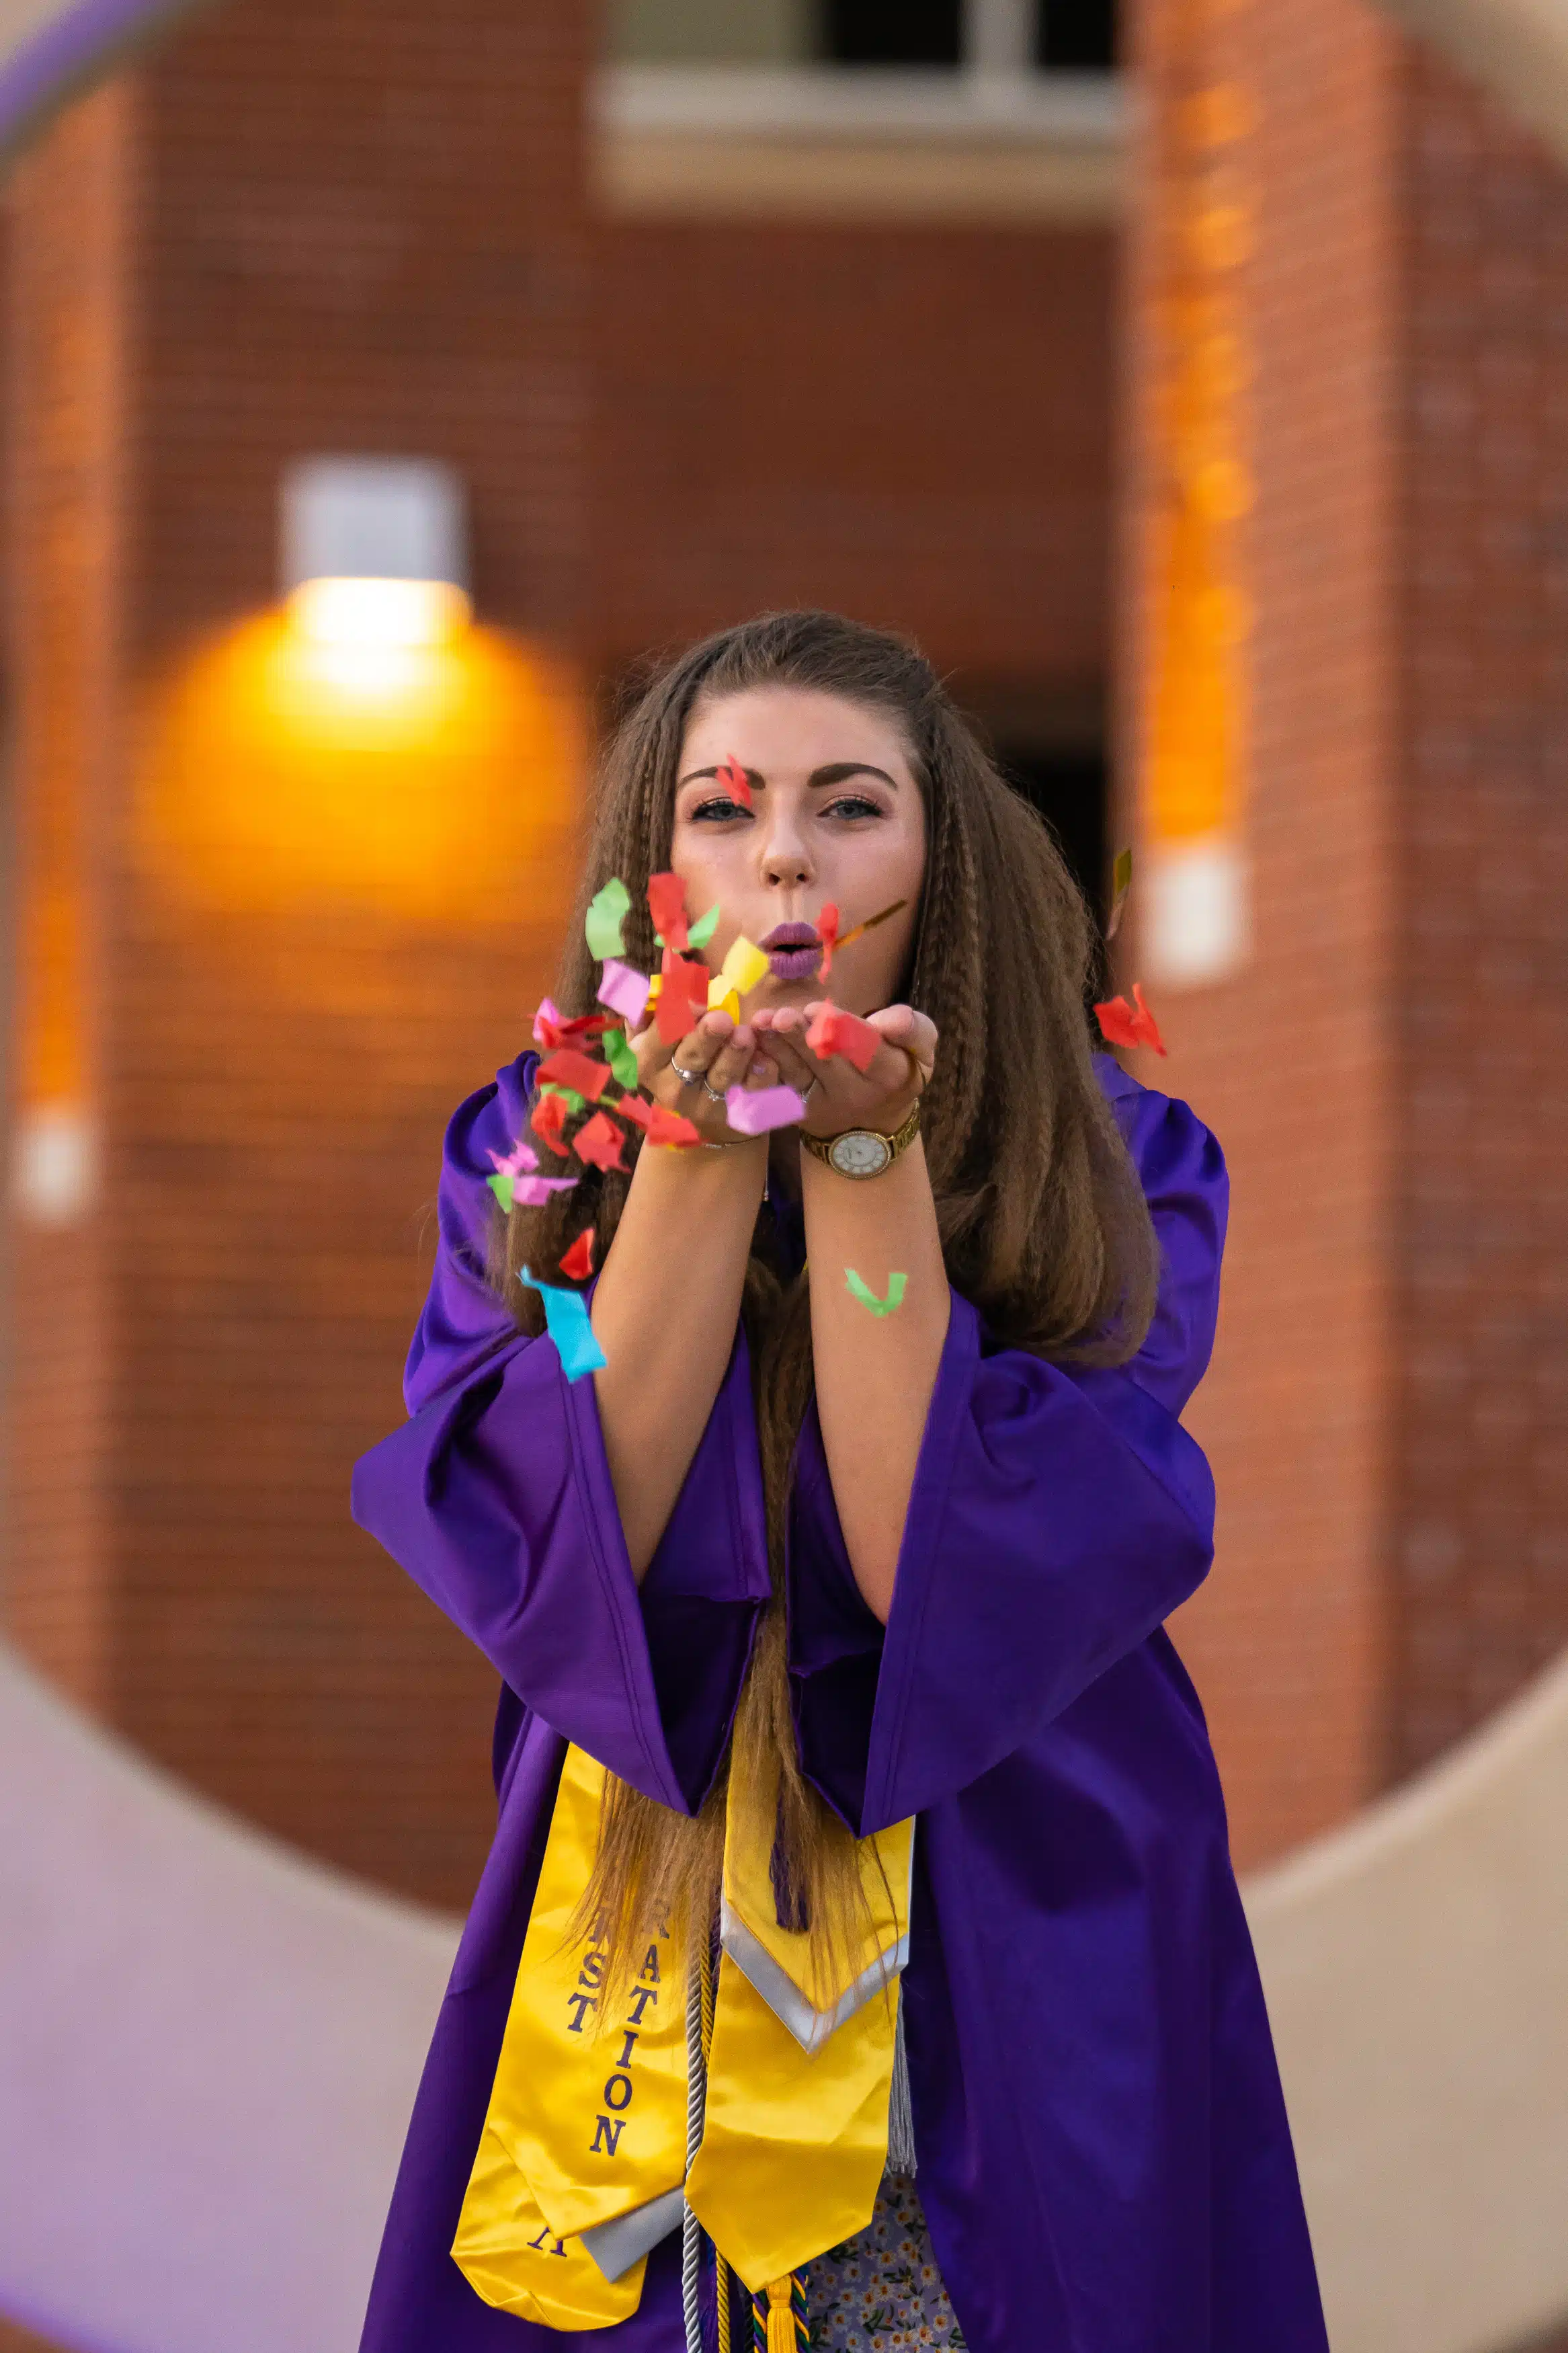 Girl blowing confetti for her Graduation photos, while being on ECU Campus. She is standing in front of East Carolina University College new ECU sign